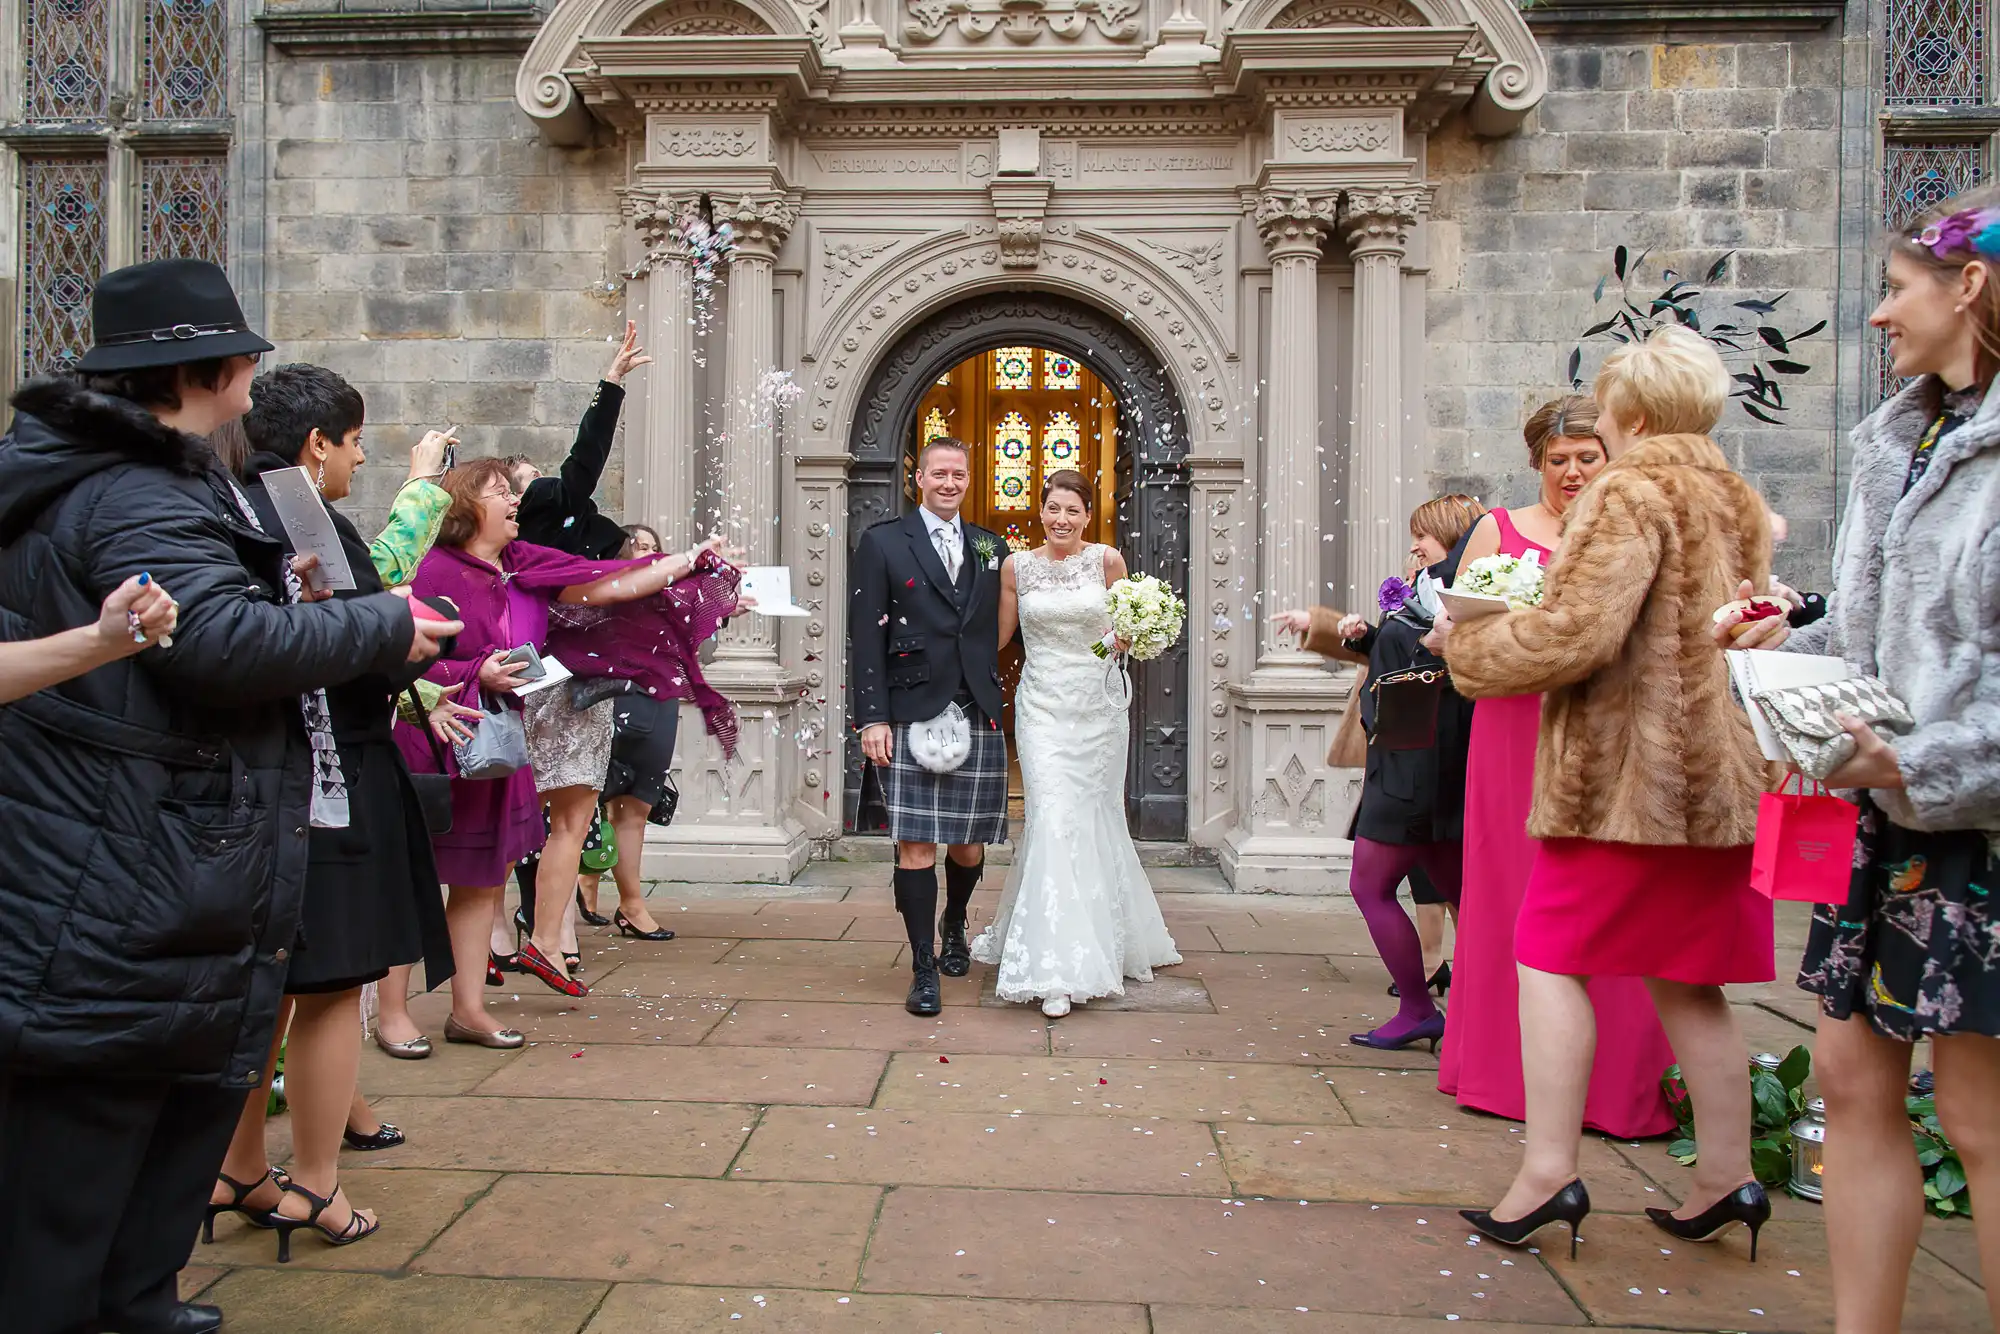 A newlywed couple exits a church as guests throw confetti; the groom wears a kilt, and the bride is in a white dress.